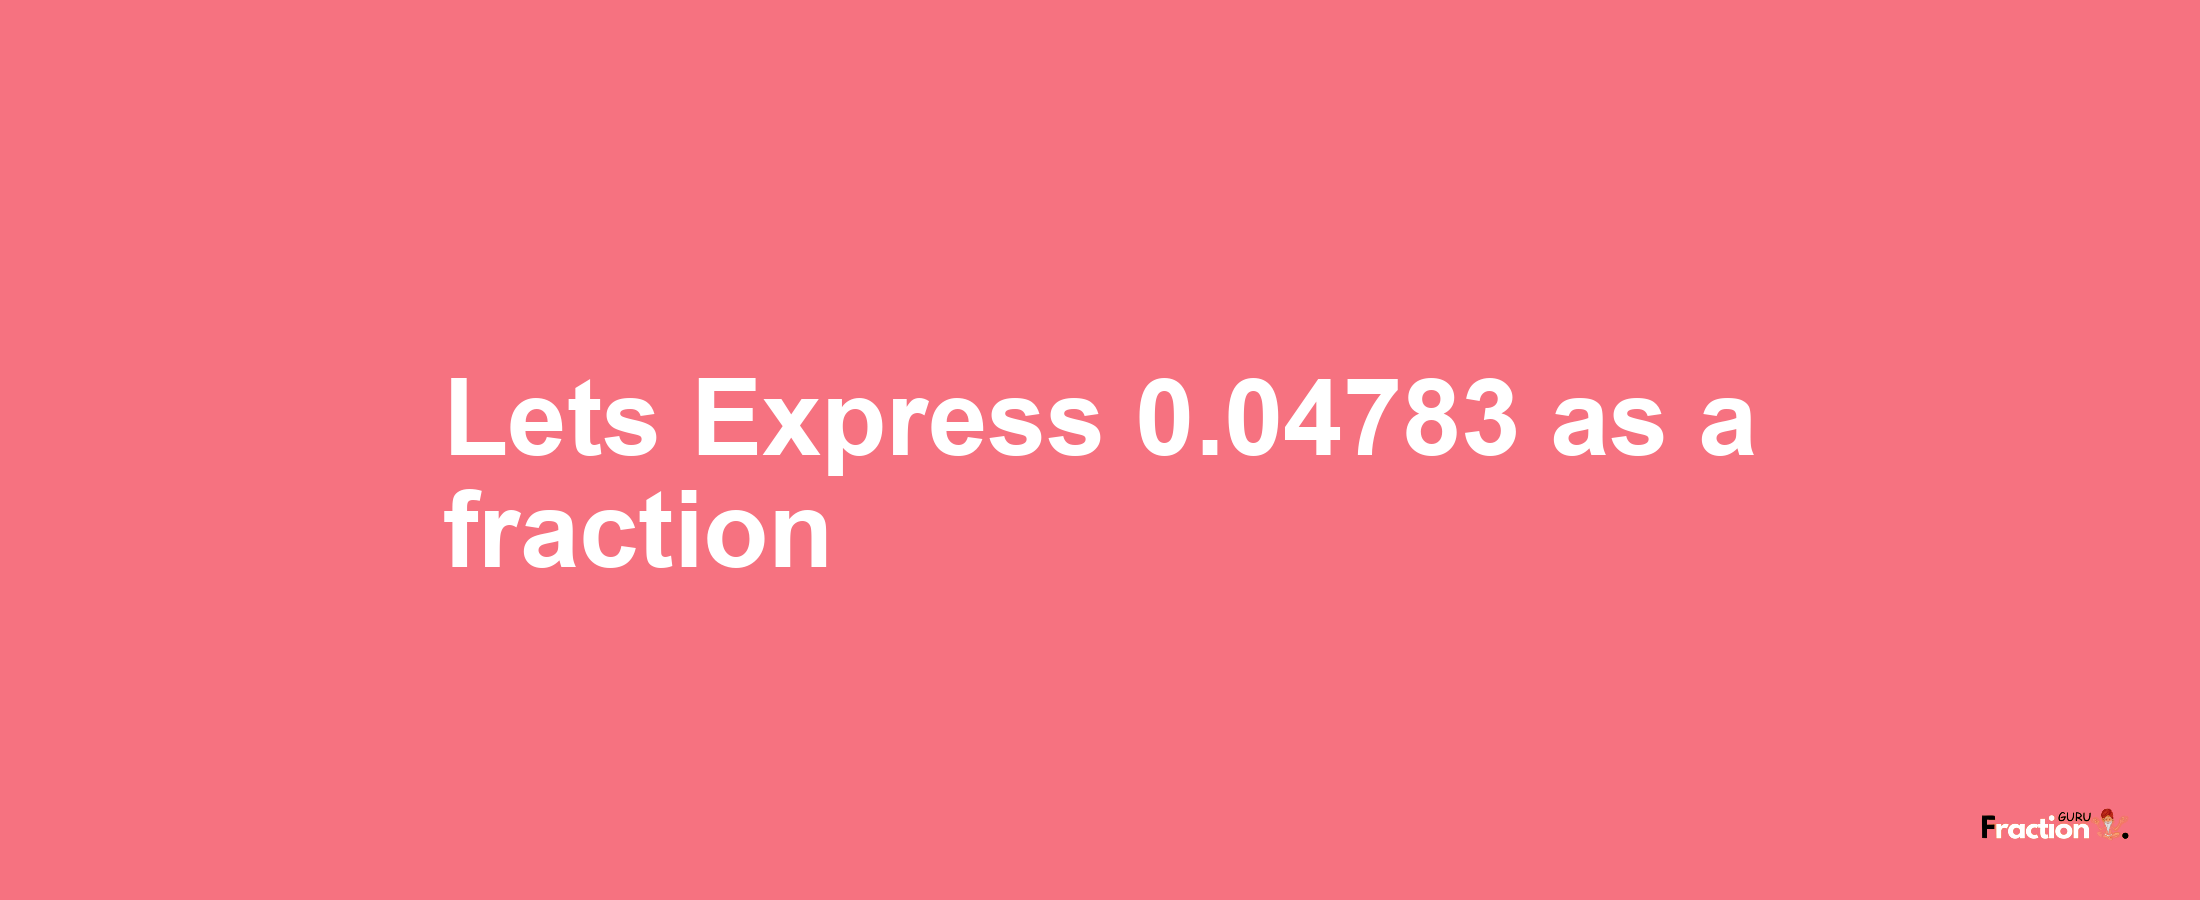 Lets Express 0.04783 as afraction